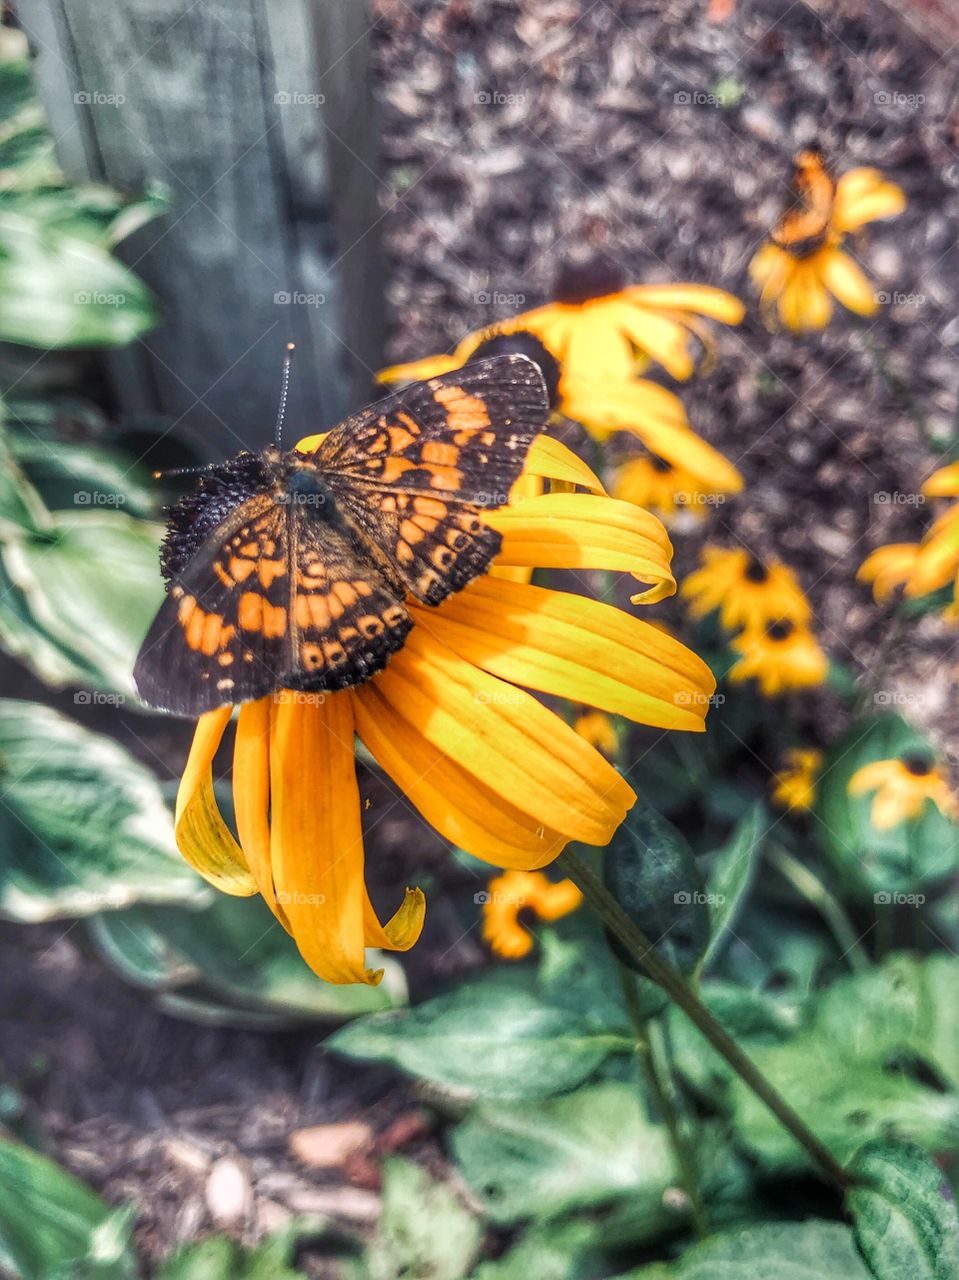 Butterfly black eyed Susan 